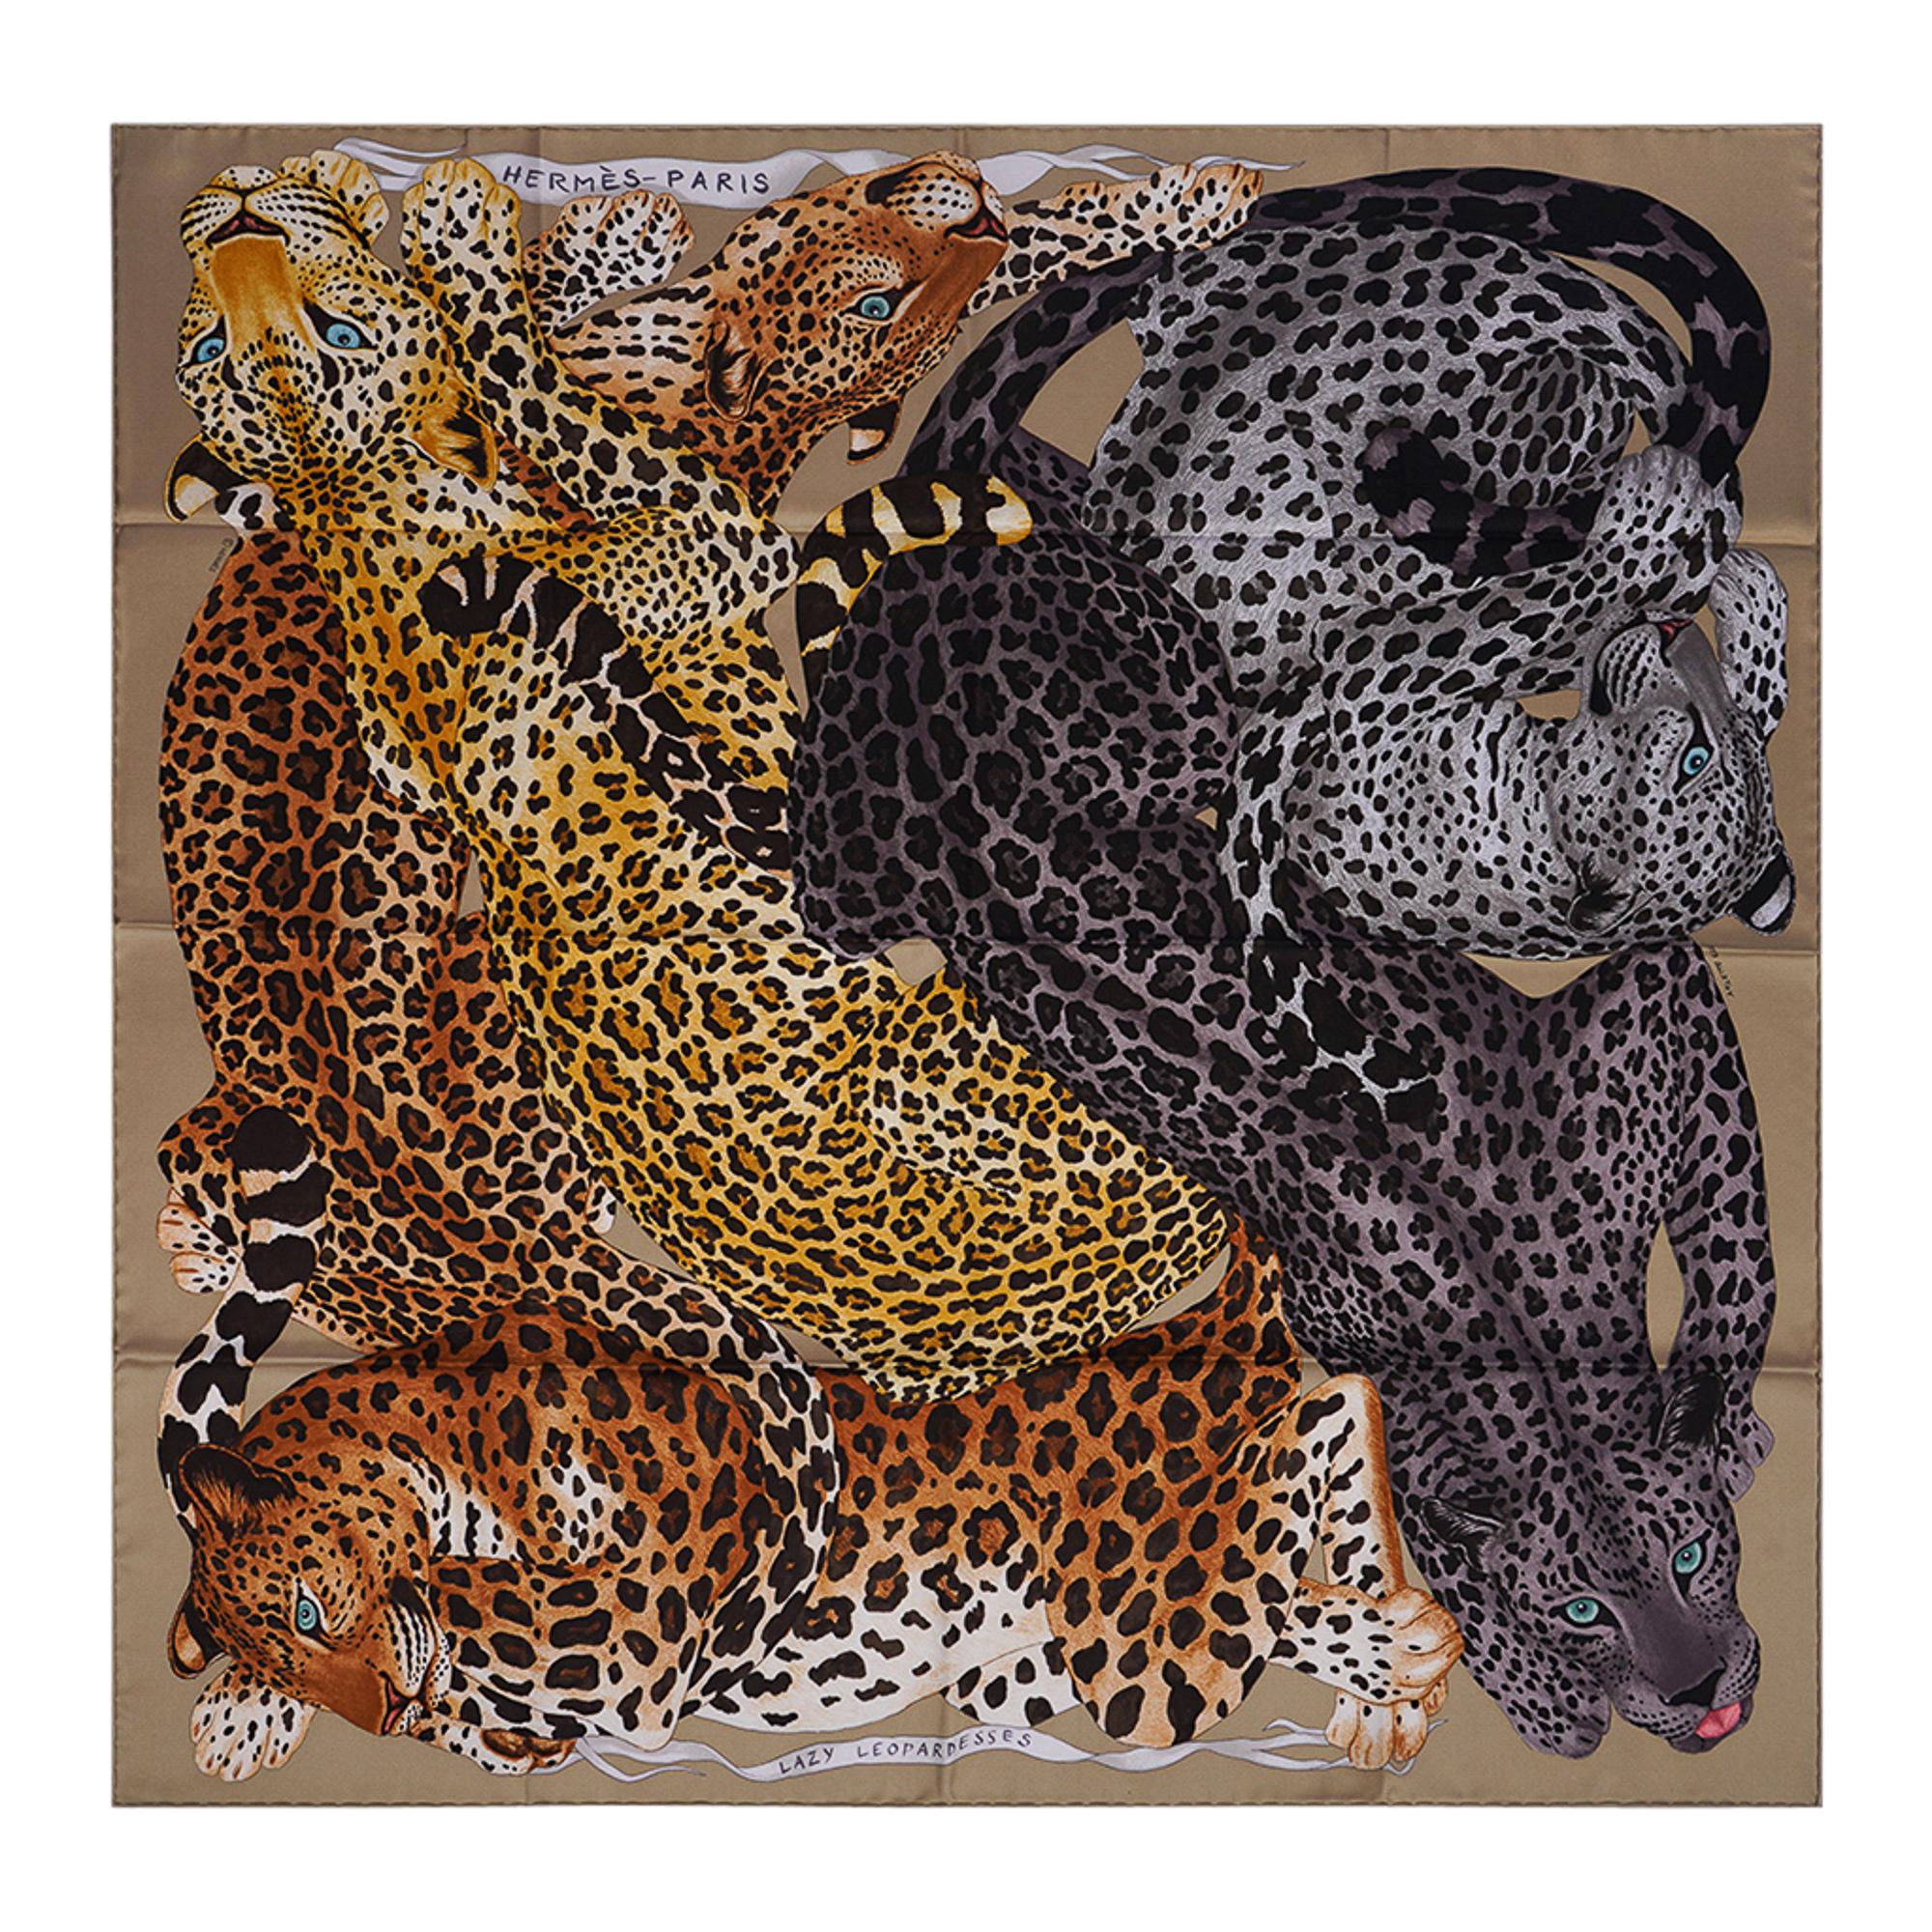 Mightychic offers an Hermes Lazy Leopardesses silk scarf featured in Camel, Anthracite and Fauve.
This exquisite Hermes scarf depicts the graceful majesty of felines in rest.
Designed by Arlette Ess.
Signature hand rolled edge.
Comes with signature